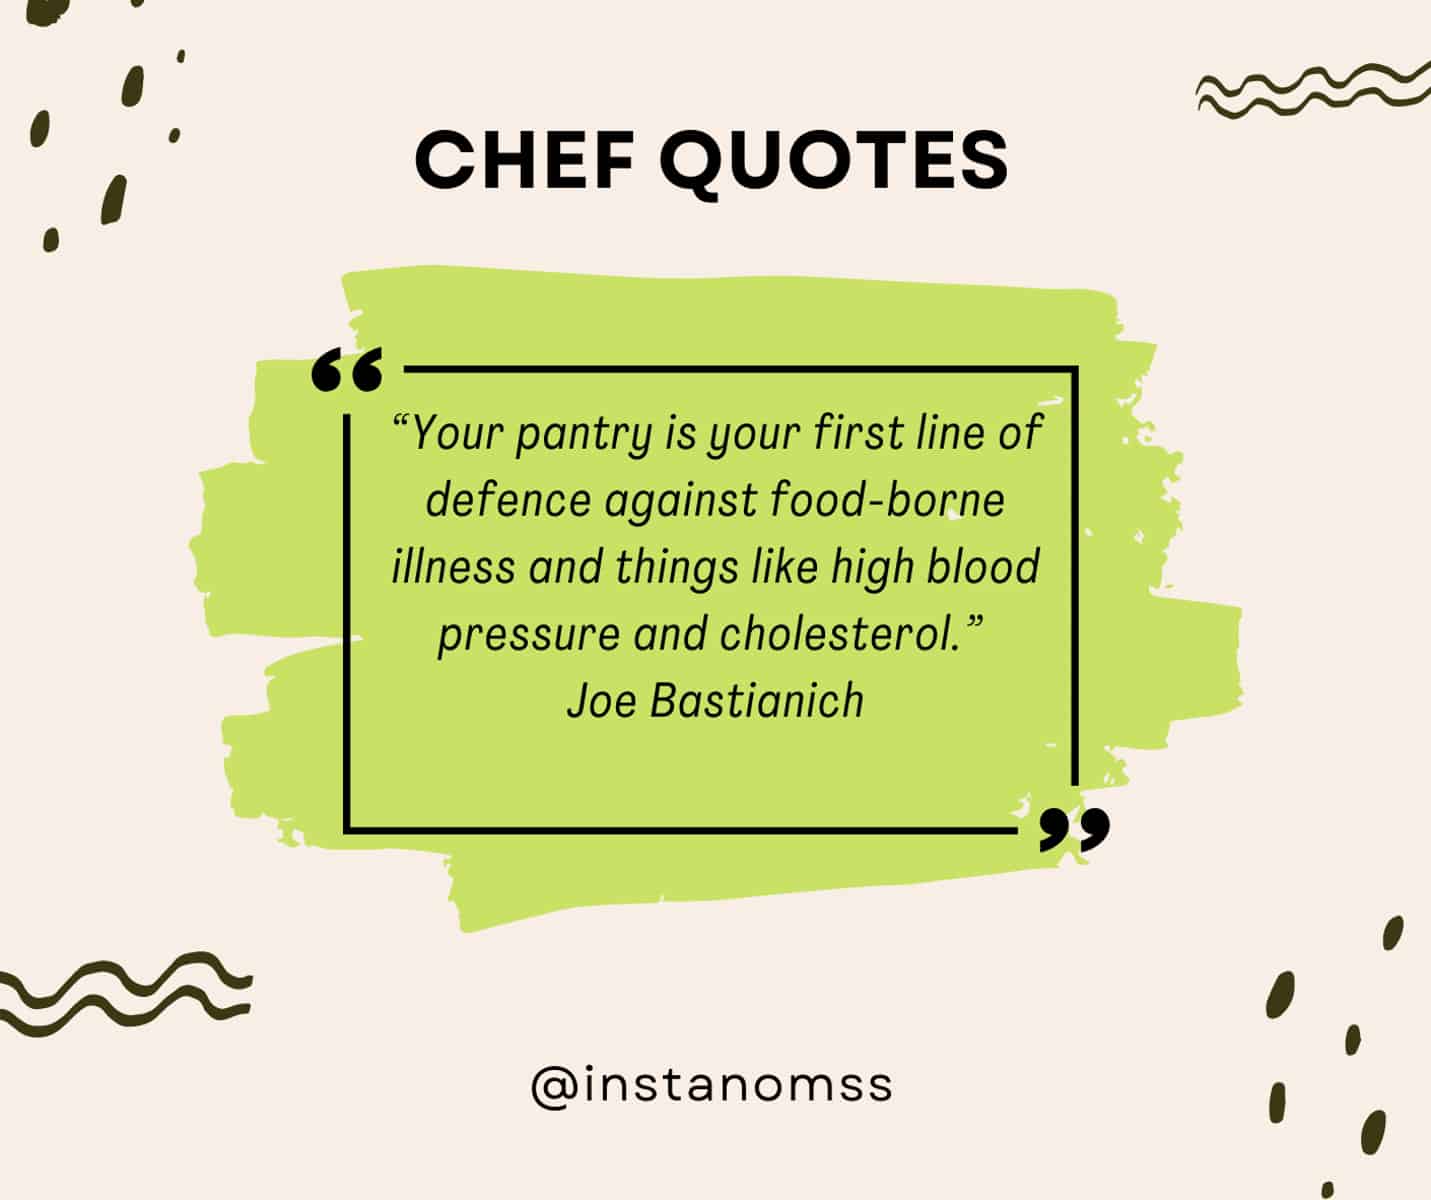 “Your pantry is your first line of defense against food-borne illness and things like high blood pressure and cholesterol.” Joe Bastianich